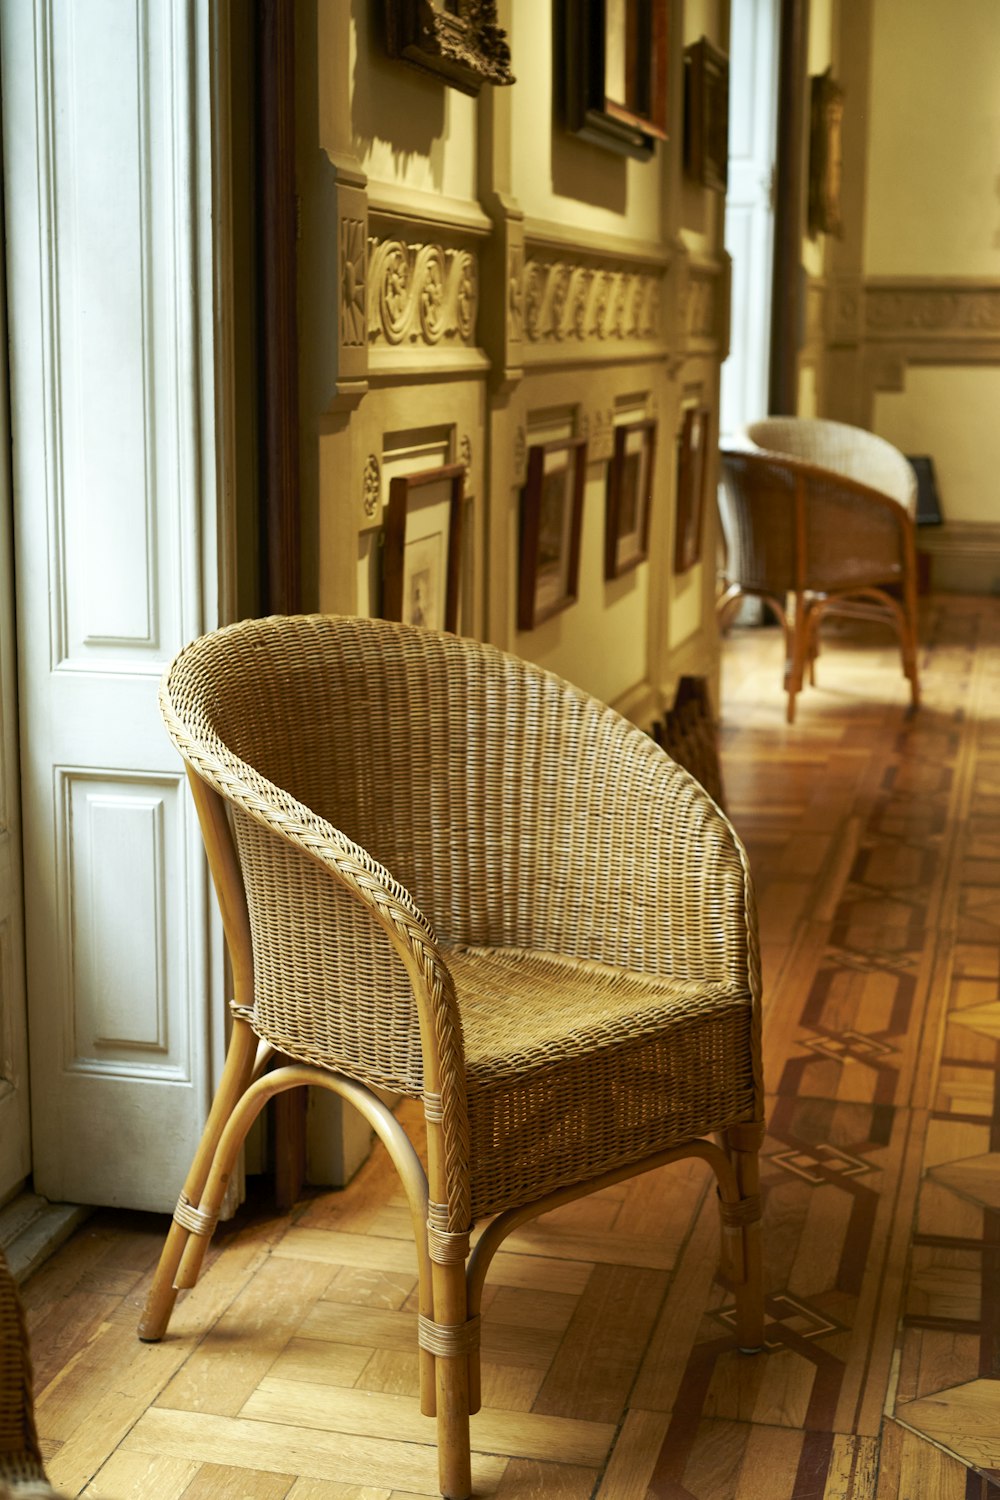 a wicker chair sitting in a room next to a doorway